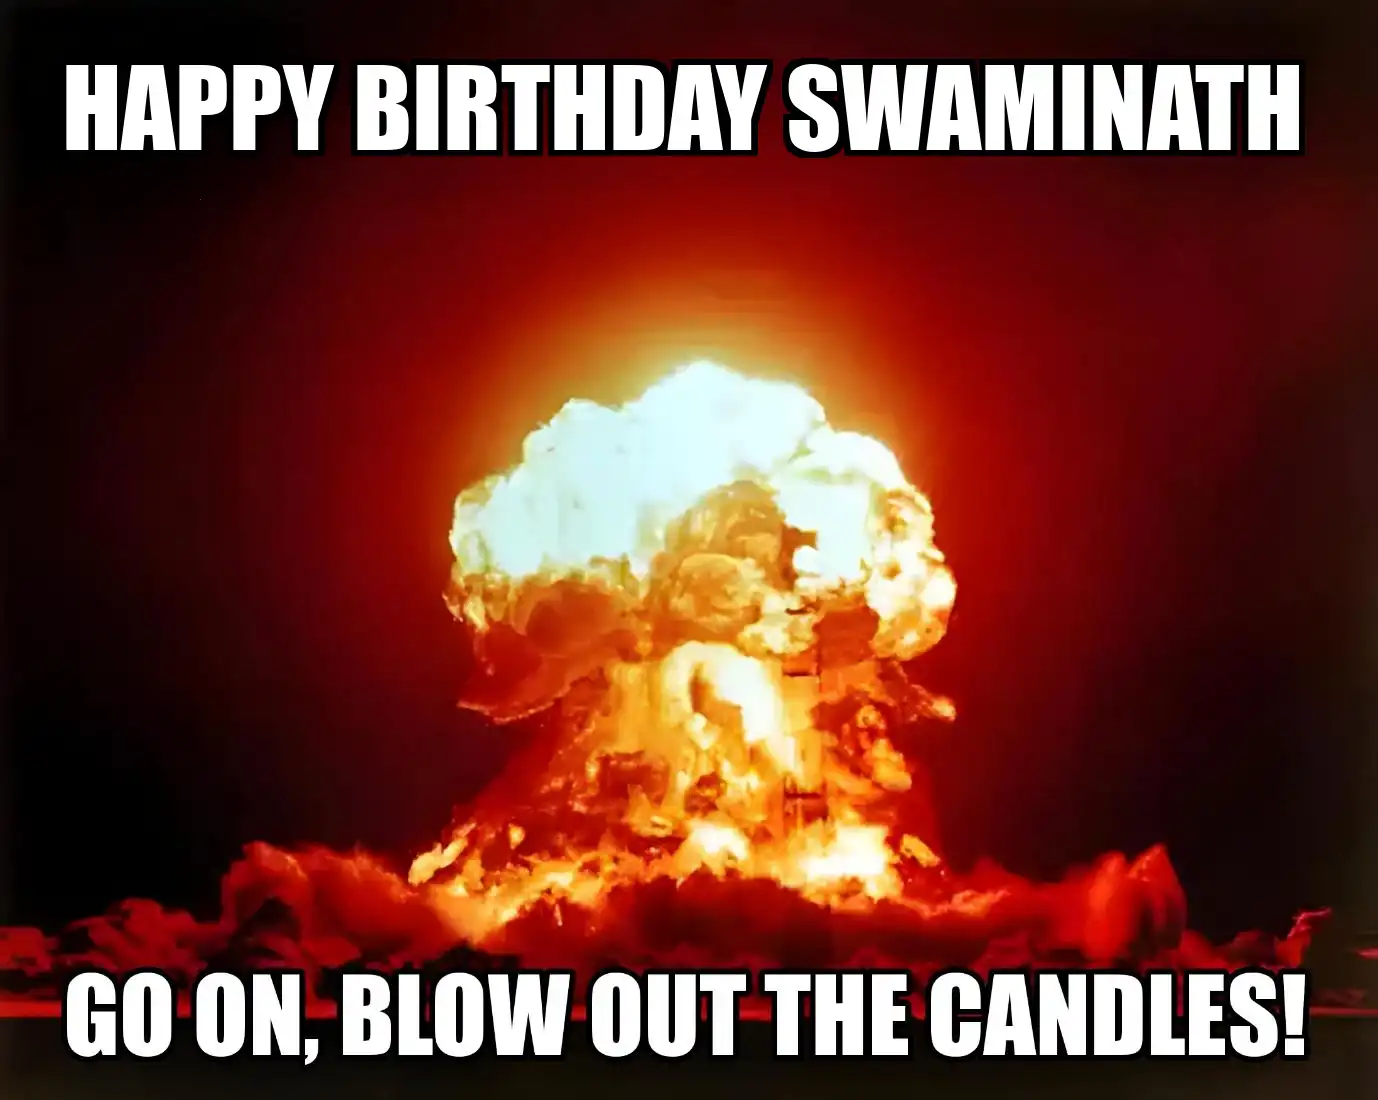 Happy Birthday Swaminath Go On Blow Out The Candles Meme